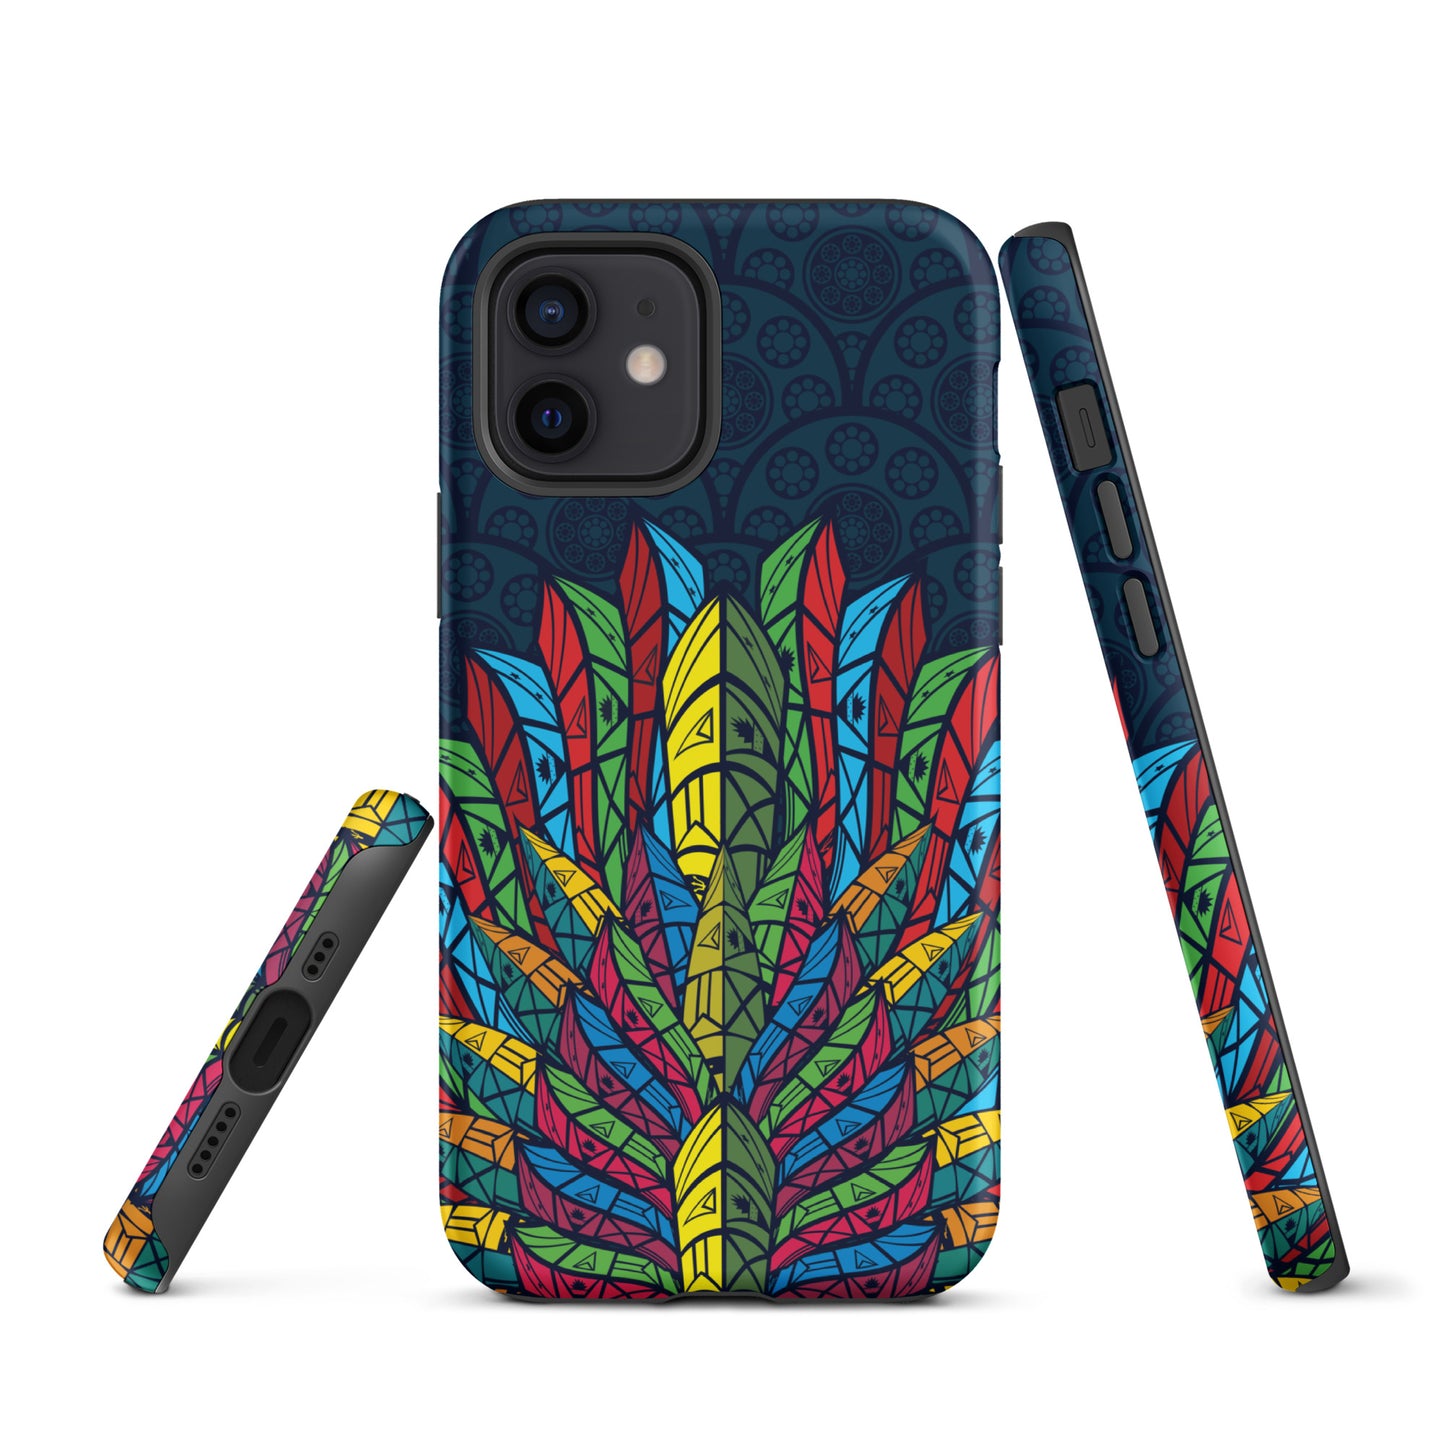 Worldtown Feather Flags iPhone case